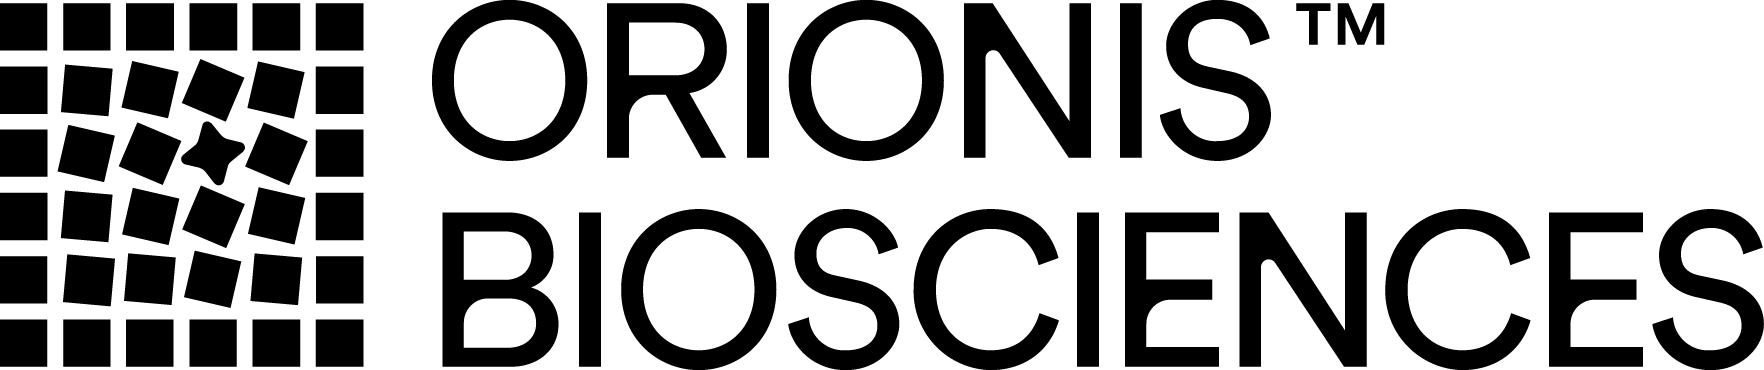 Orionis logo - 6th TPD Summit